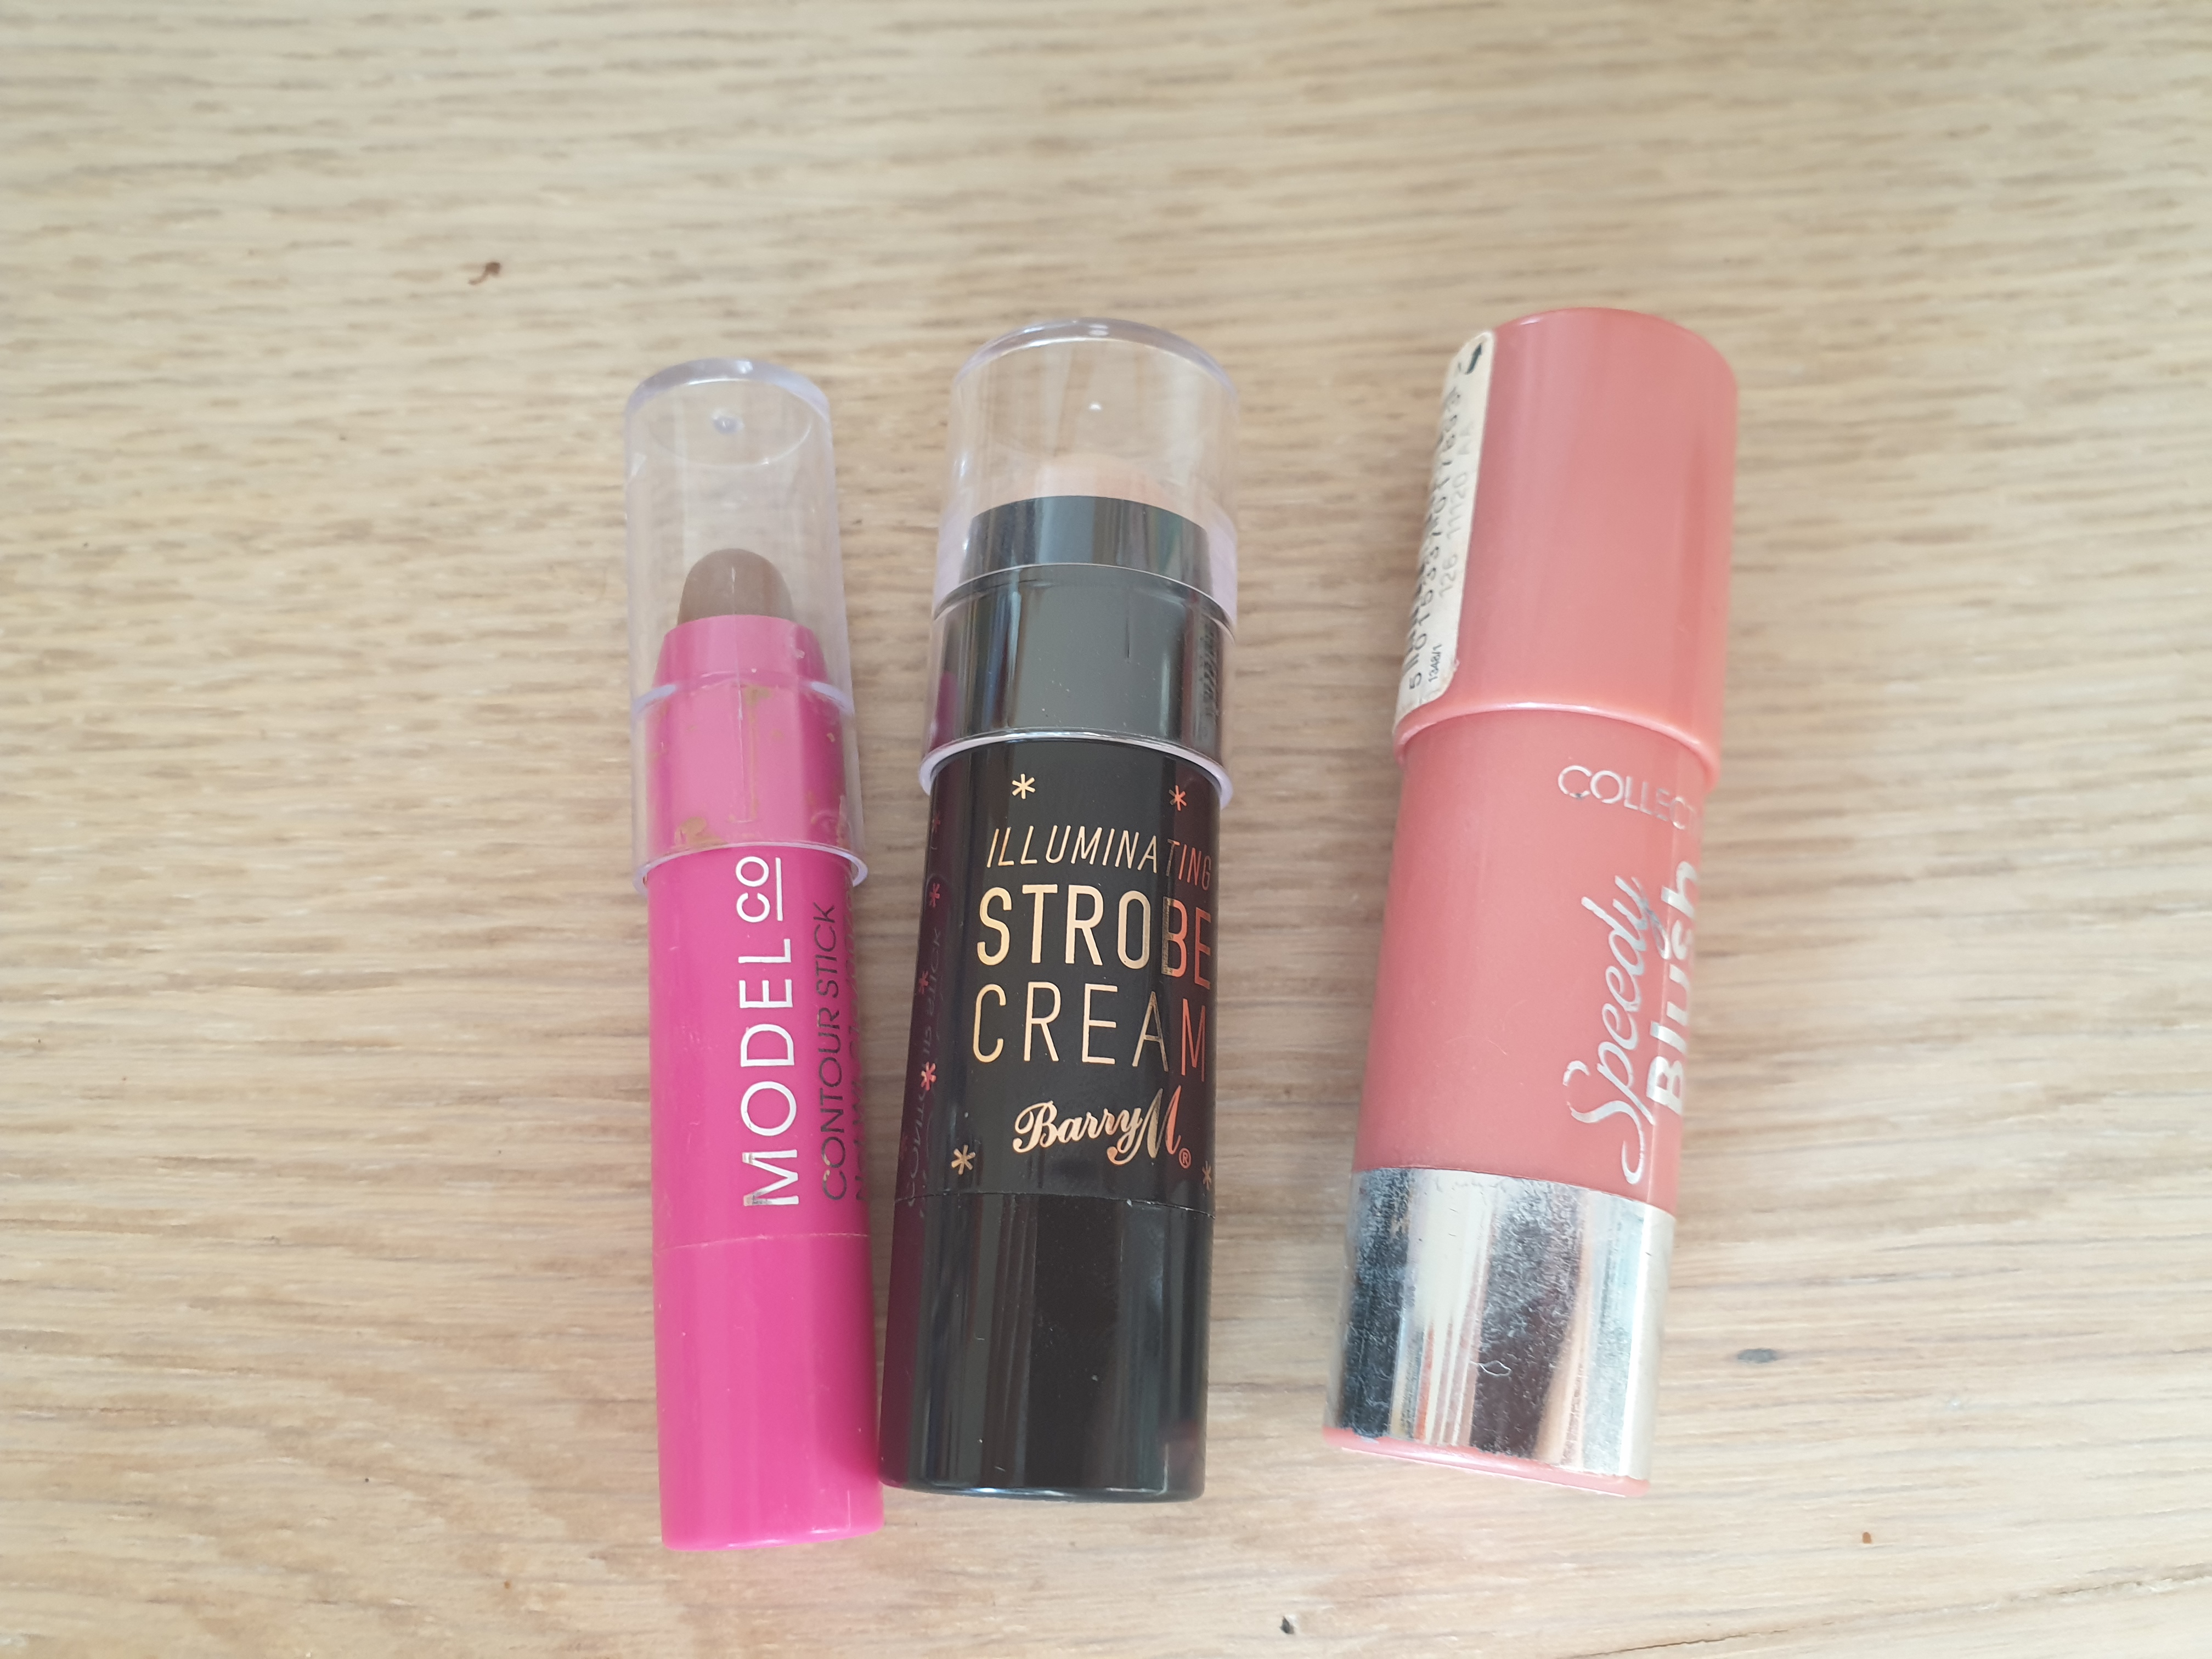 Make up products -  the contour, highlighter and blusher products mentioned within the post